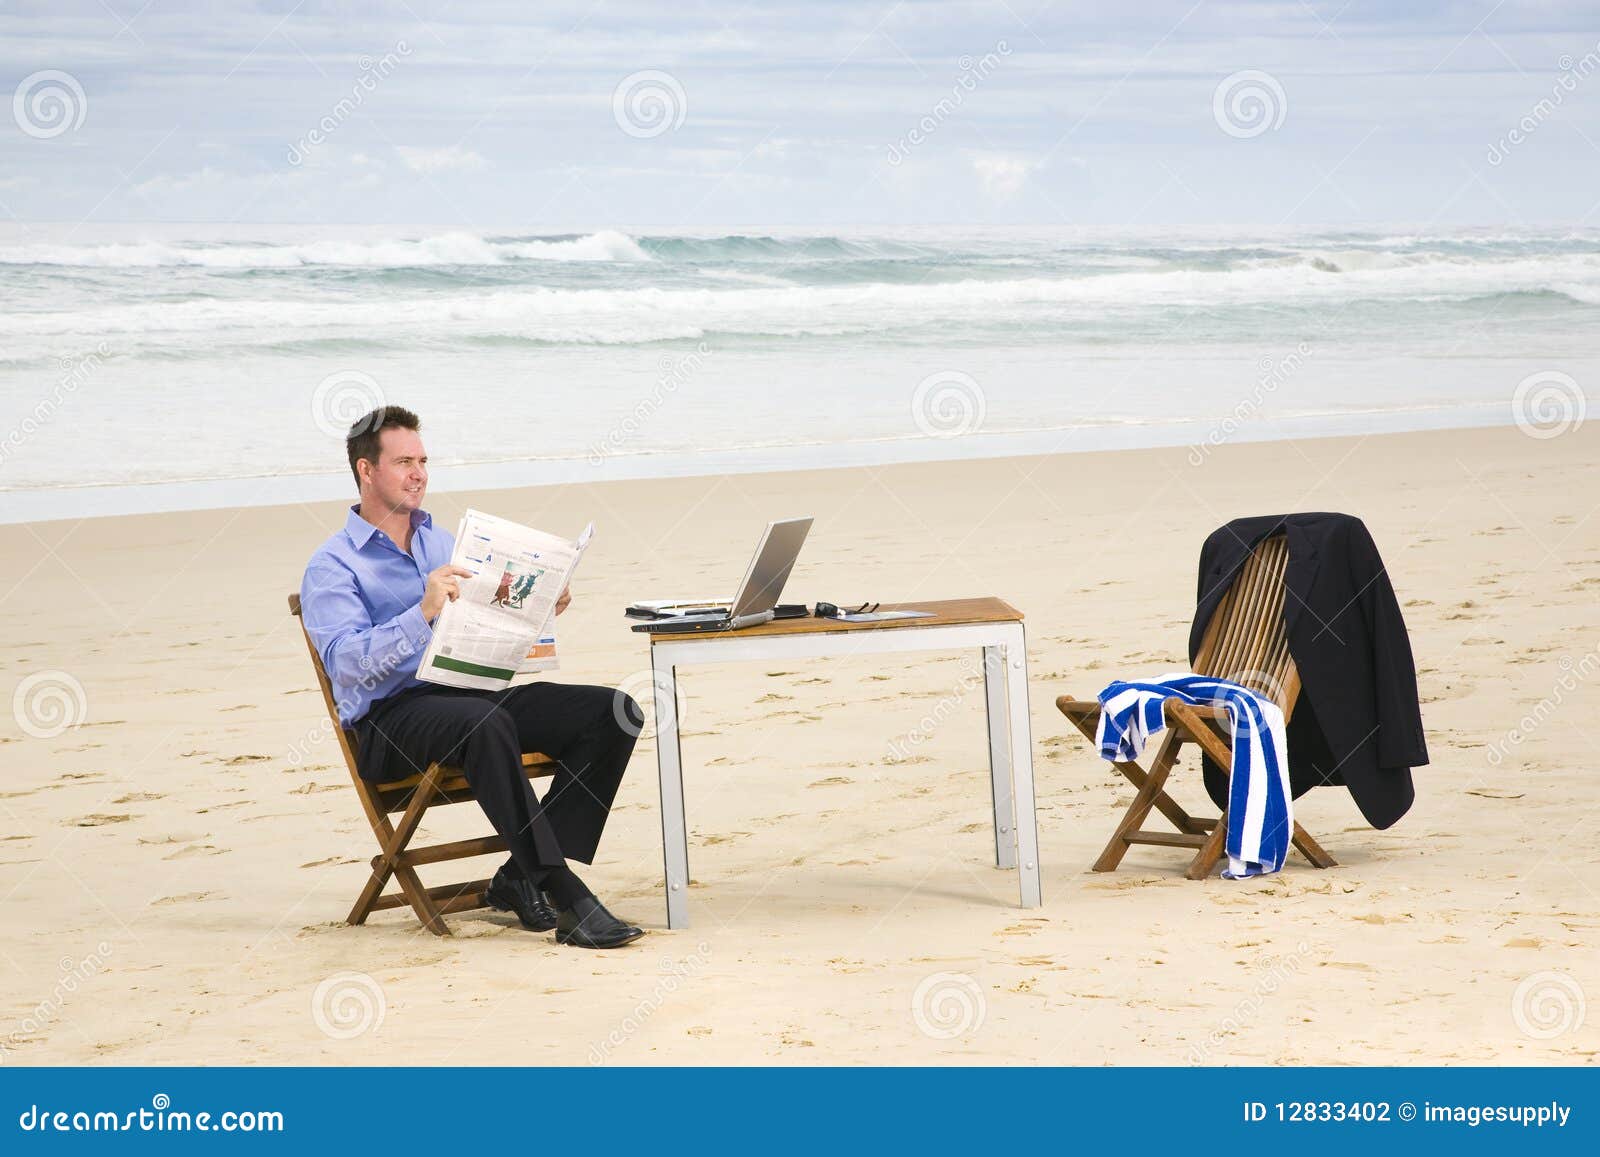 Business Man with Office on the Beach Stock Photo - Image of online ...